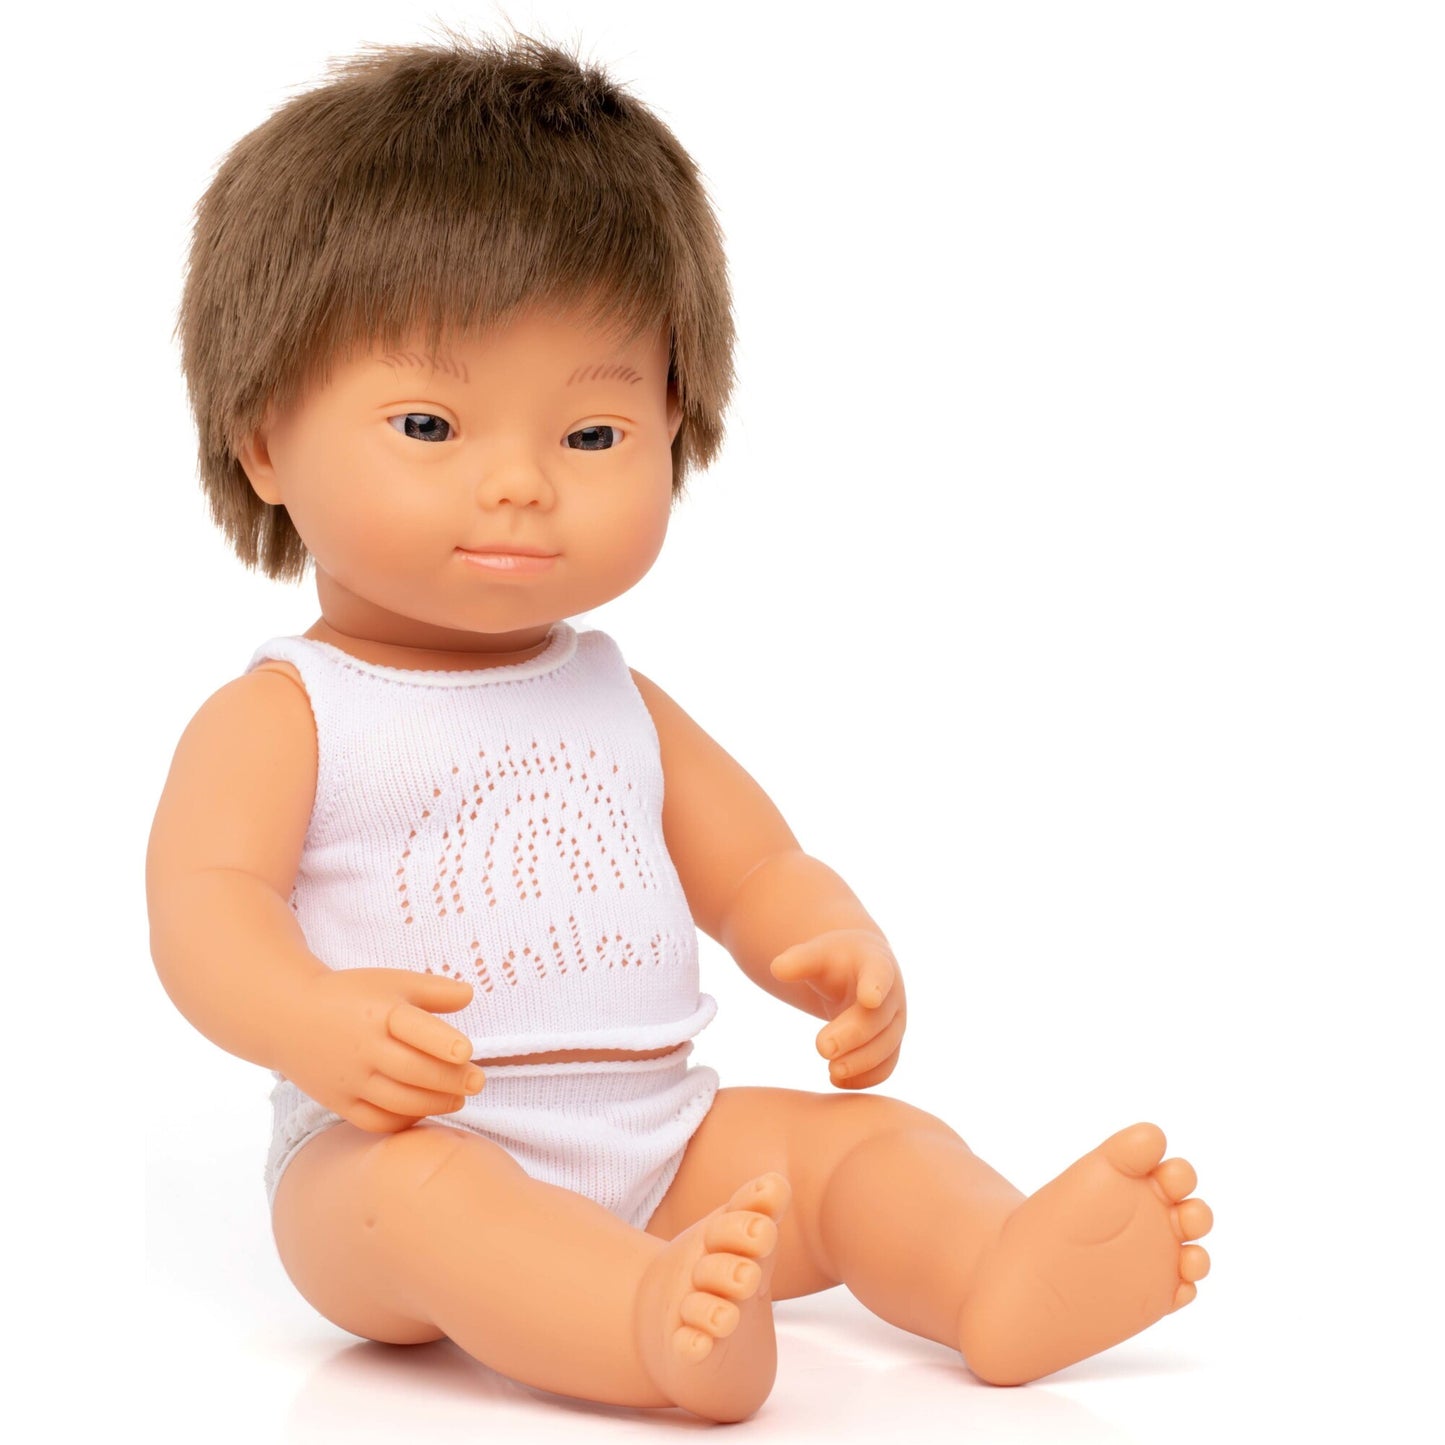 Miniland Baby Doll Caucasian Boy with Down Syndrome 15" Dolls